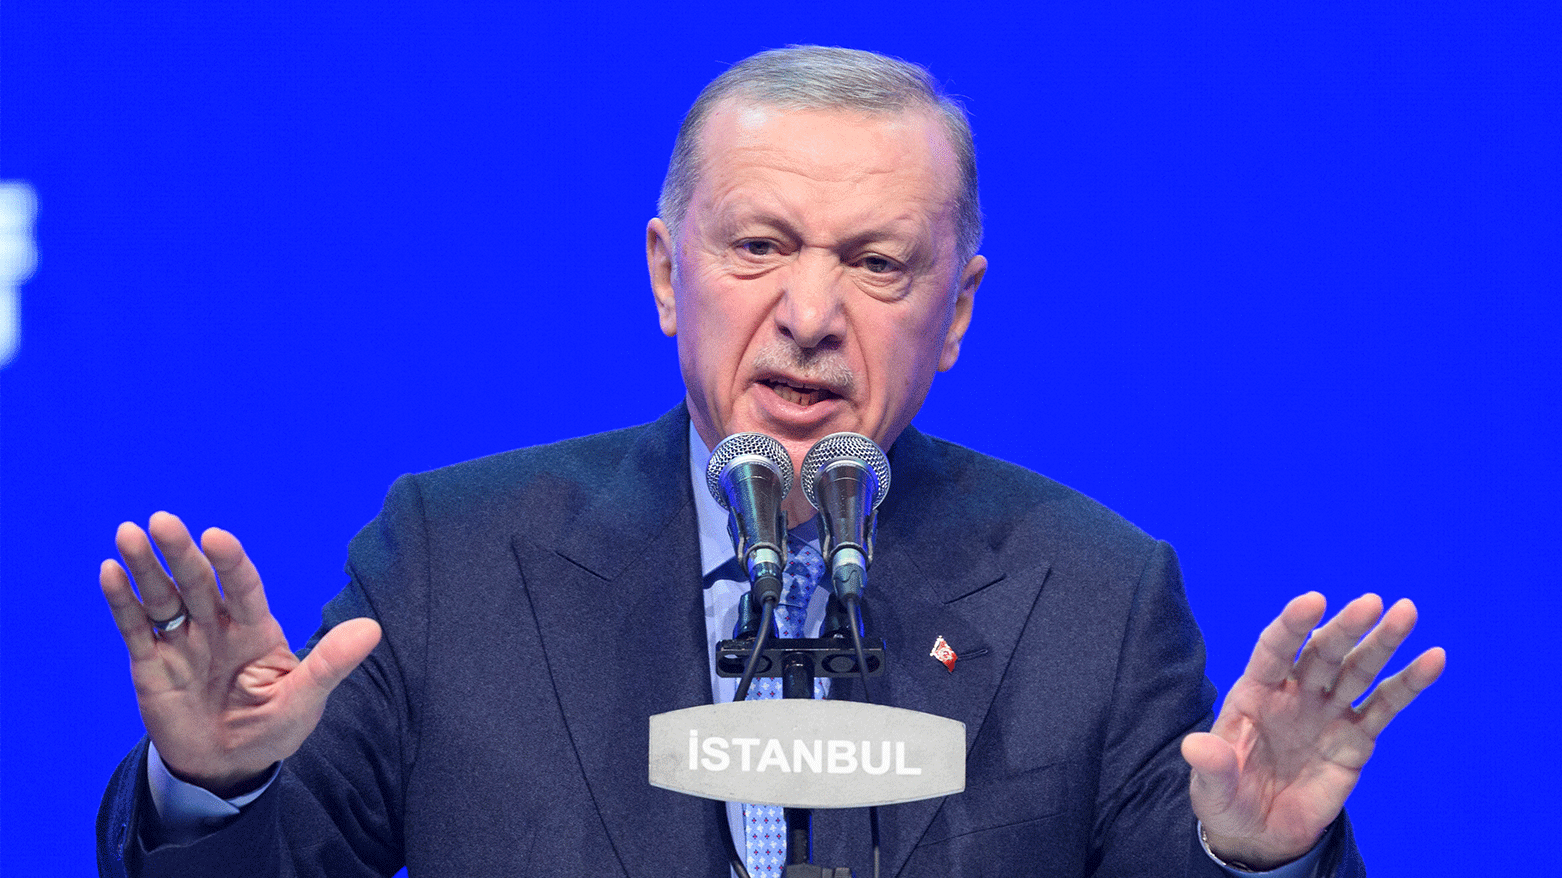 Turkish President Tayyip Erdogan speaks as he announces Murat Kurum as his ruling Justice and Development Party (AK Party) candidate in Istanbul's upcoming mayoral election in March, in Istanbul on January 7, 2024. (Photo: AFP)